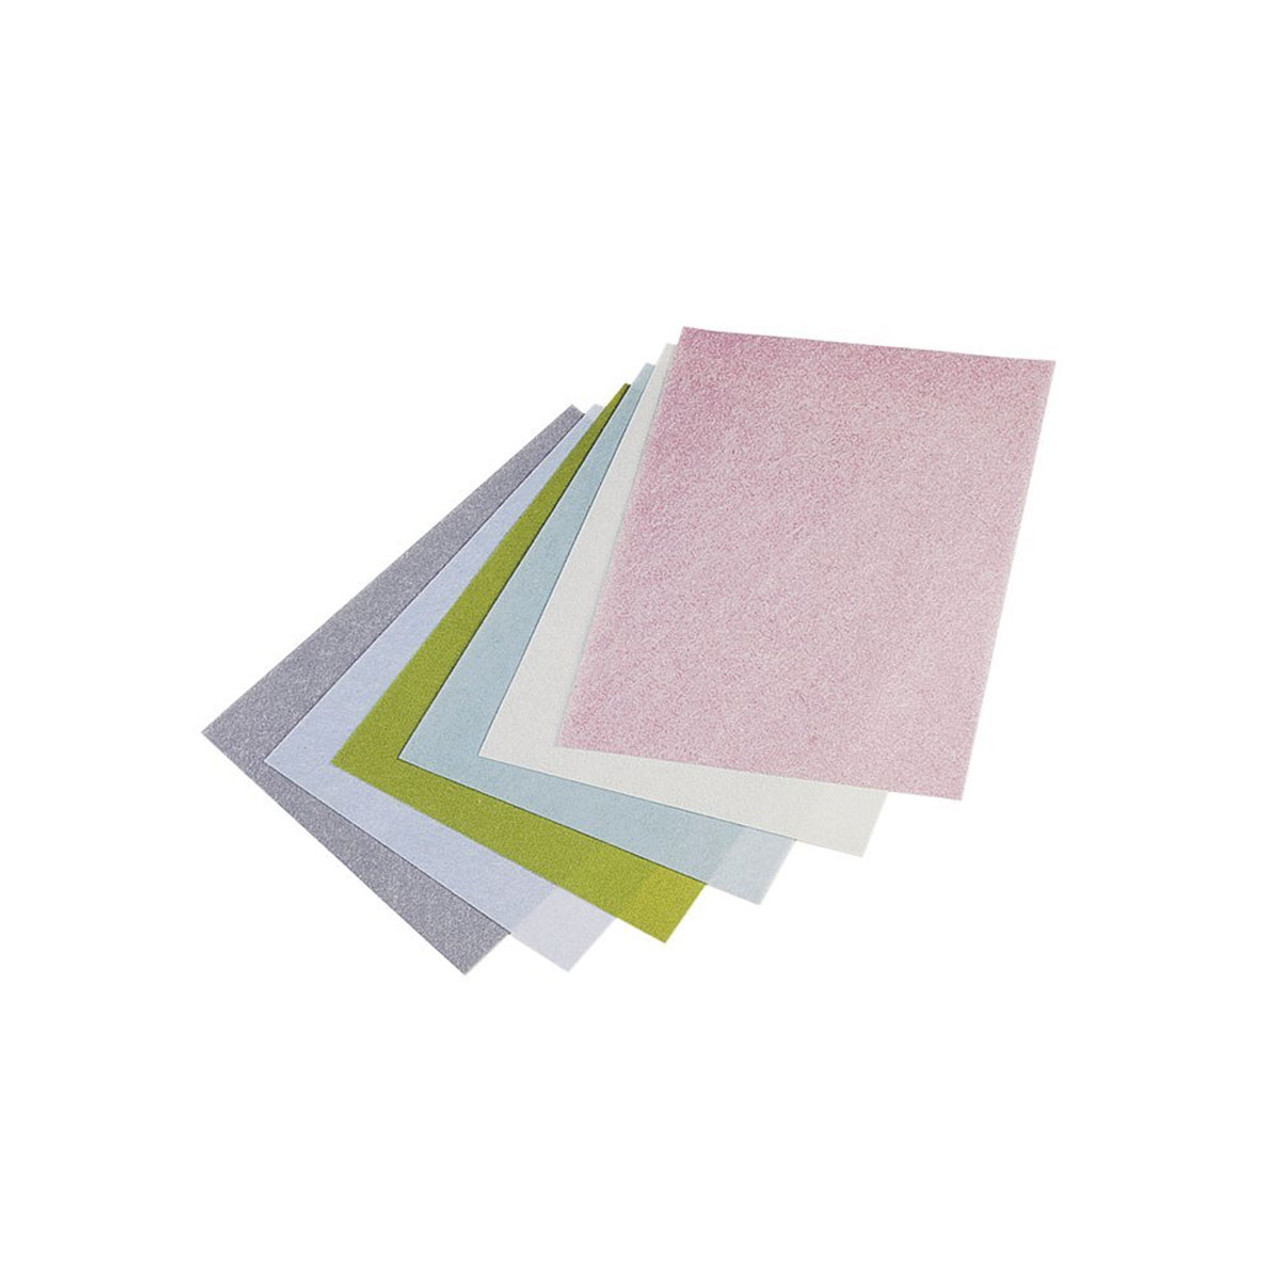 3M Polishing Papers - 6 Large Sheets